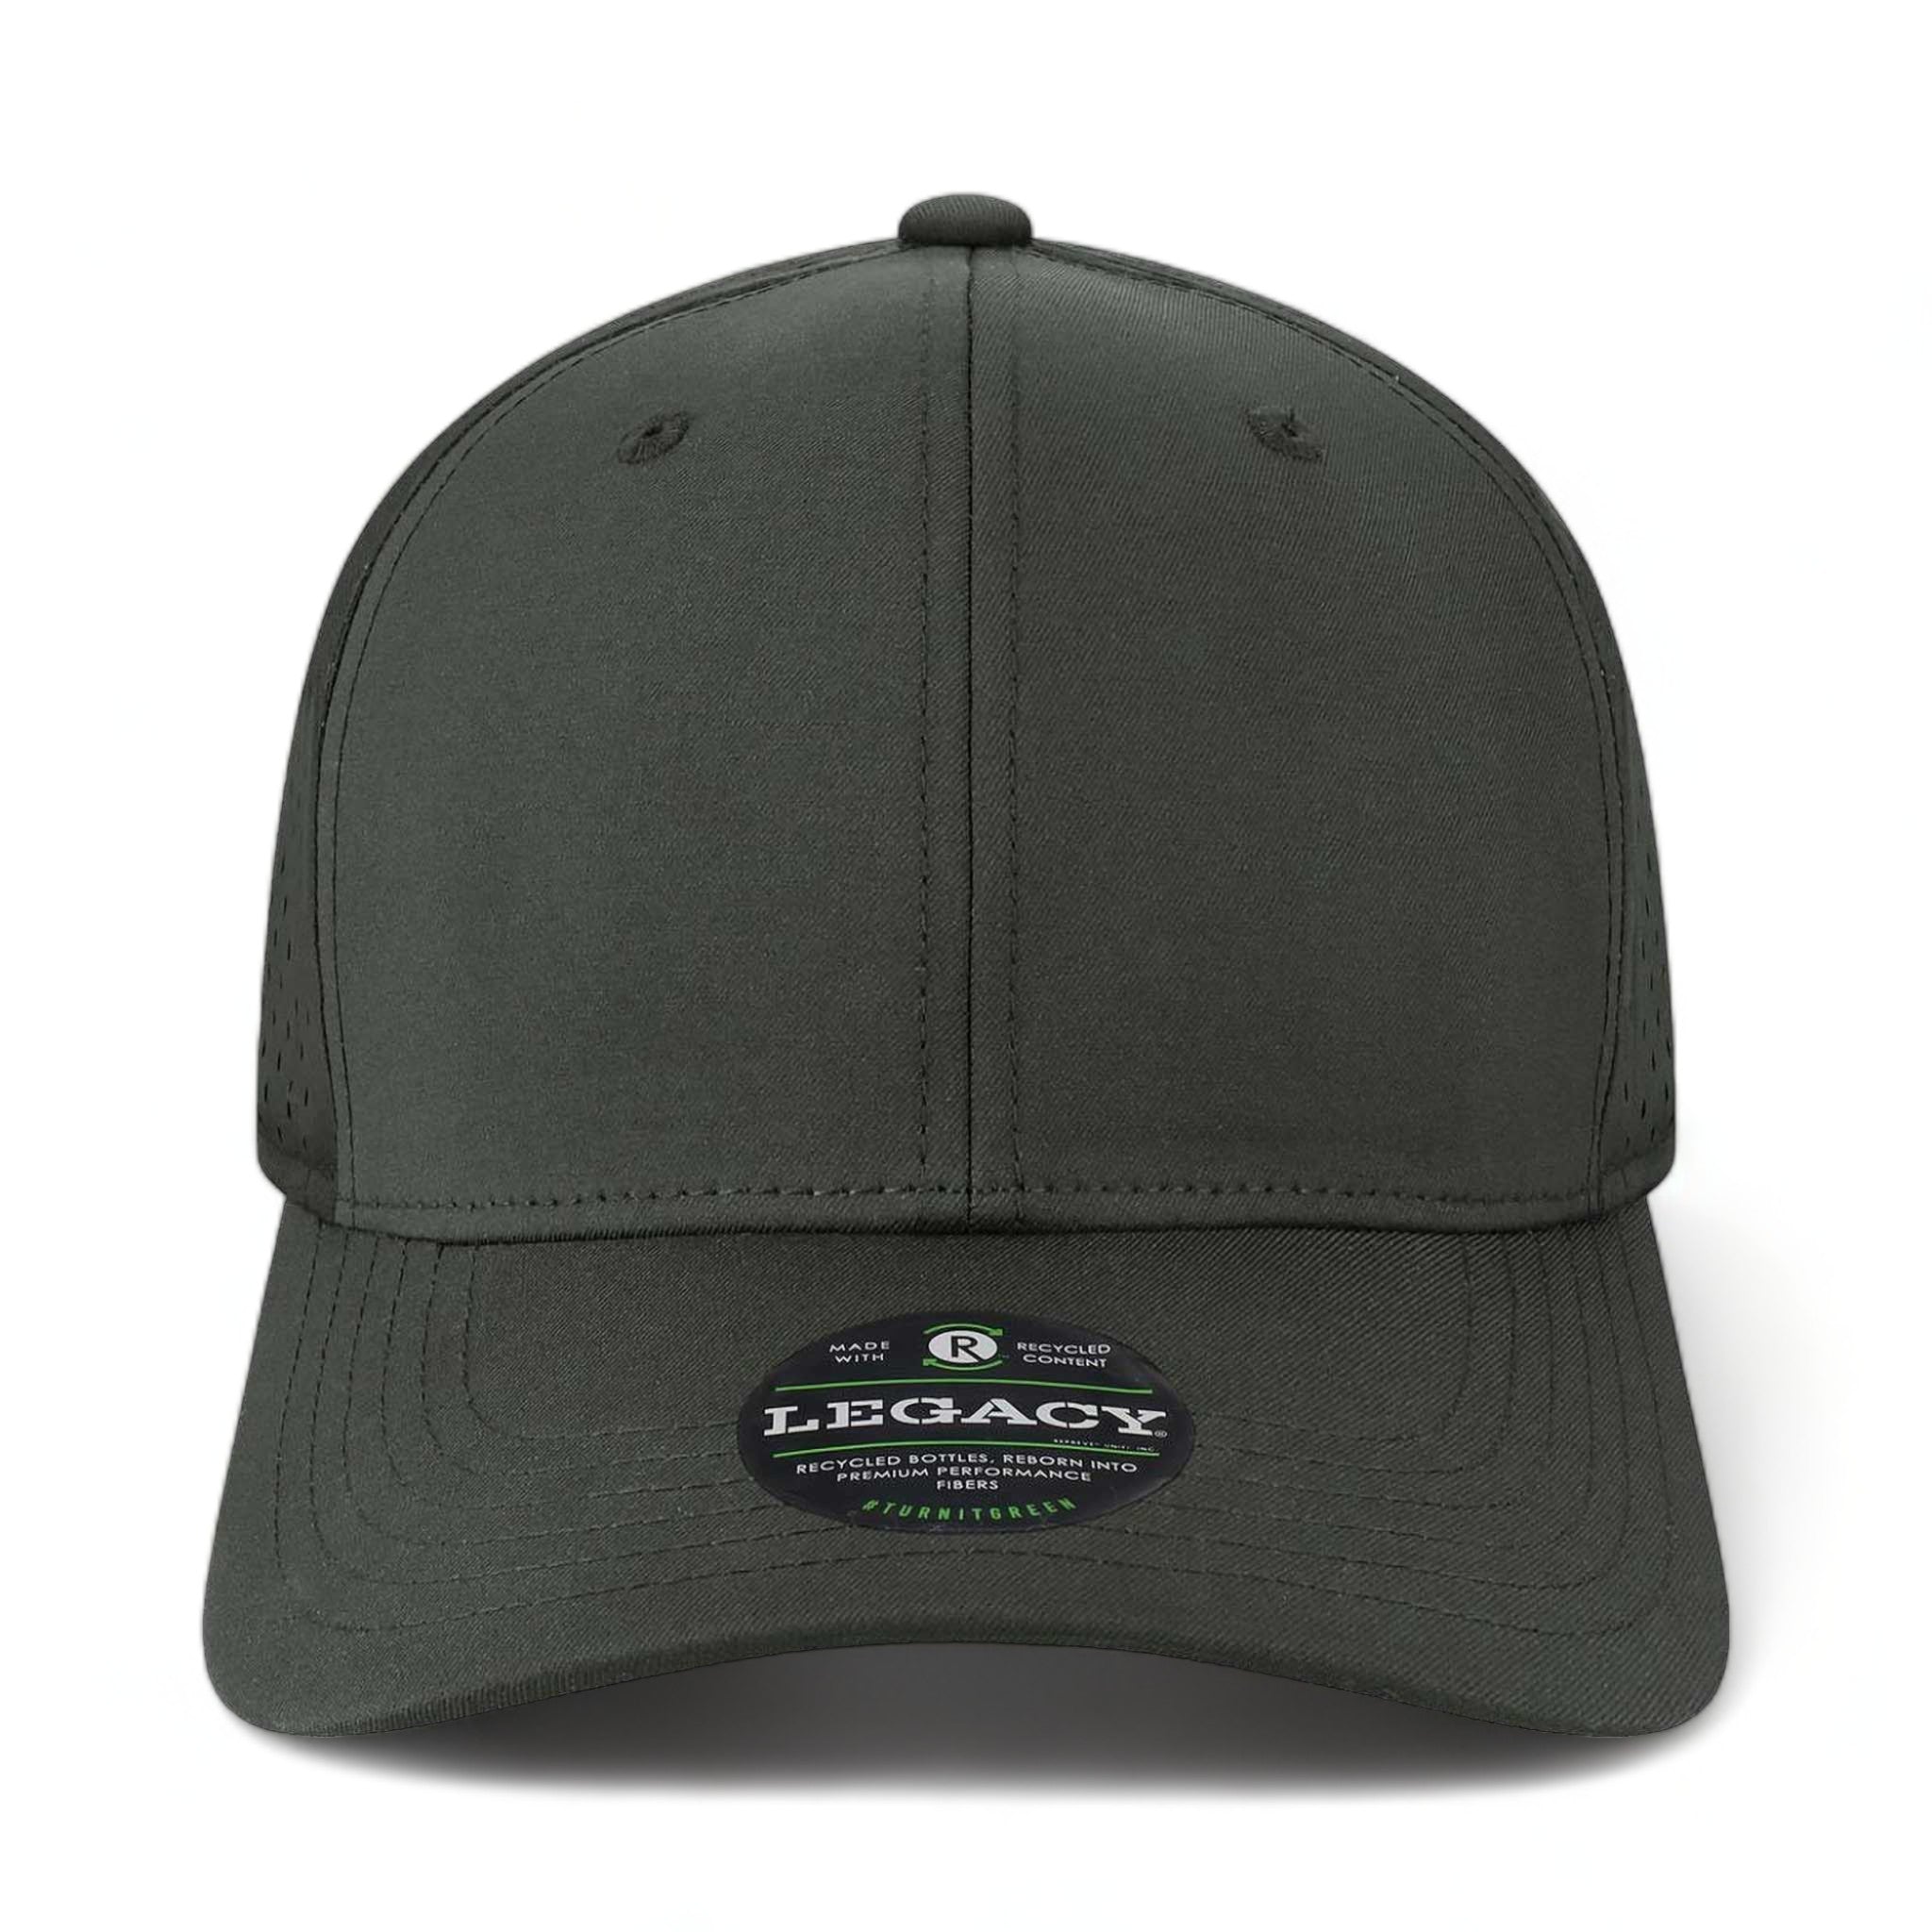 Front view of LEGACY REMPA custom hat in black